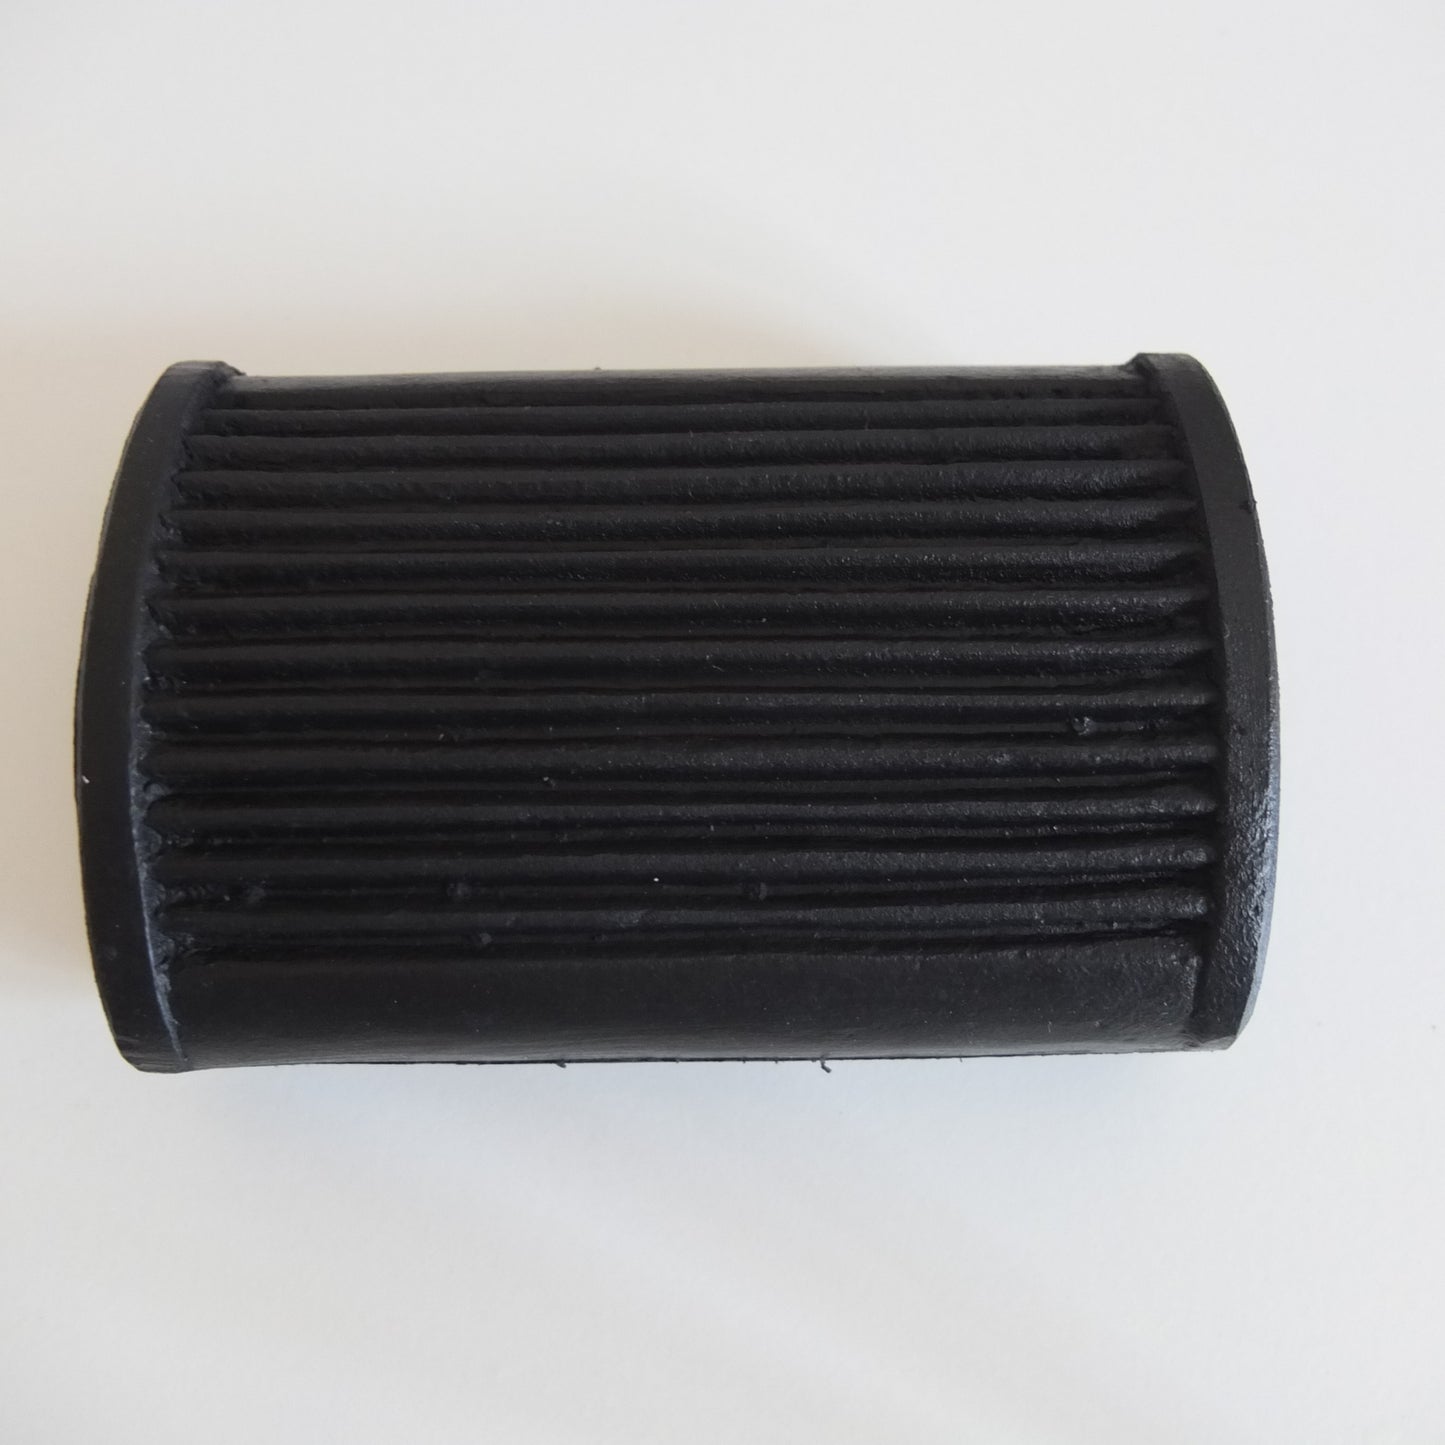 P13/001 Early Sunbeam S7 Footrest Rubber 89-4347